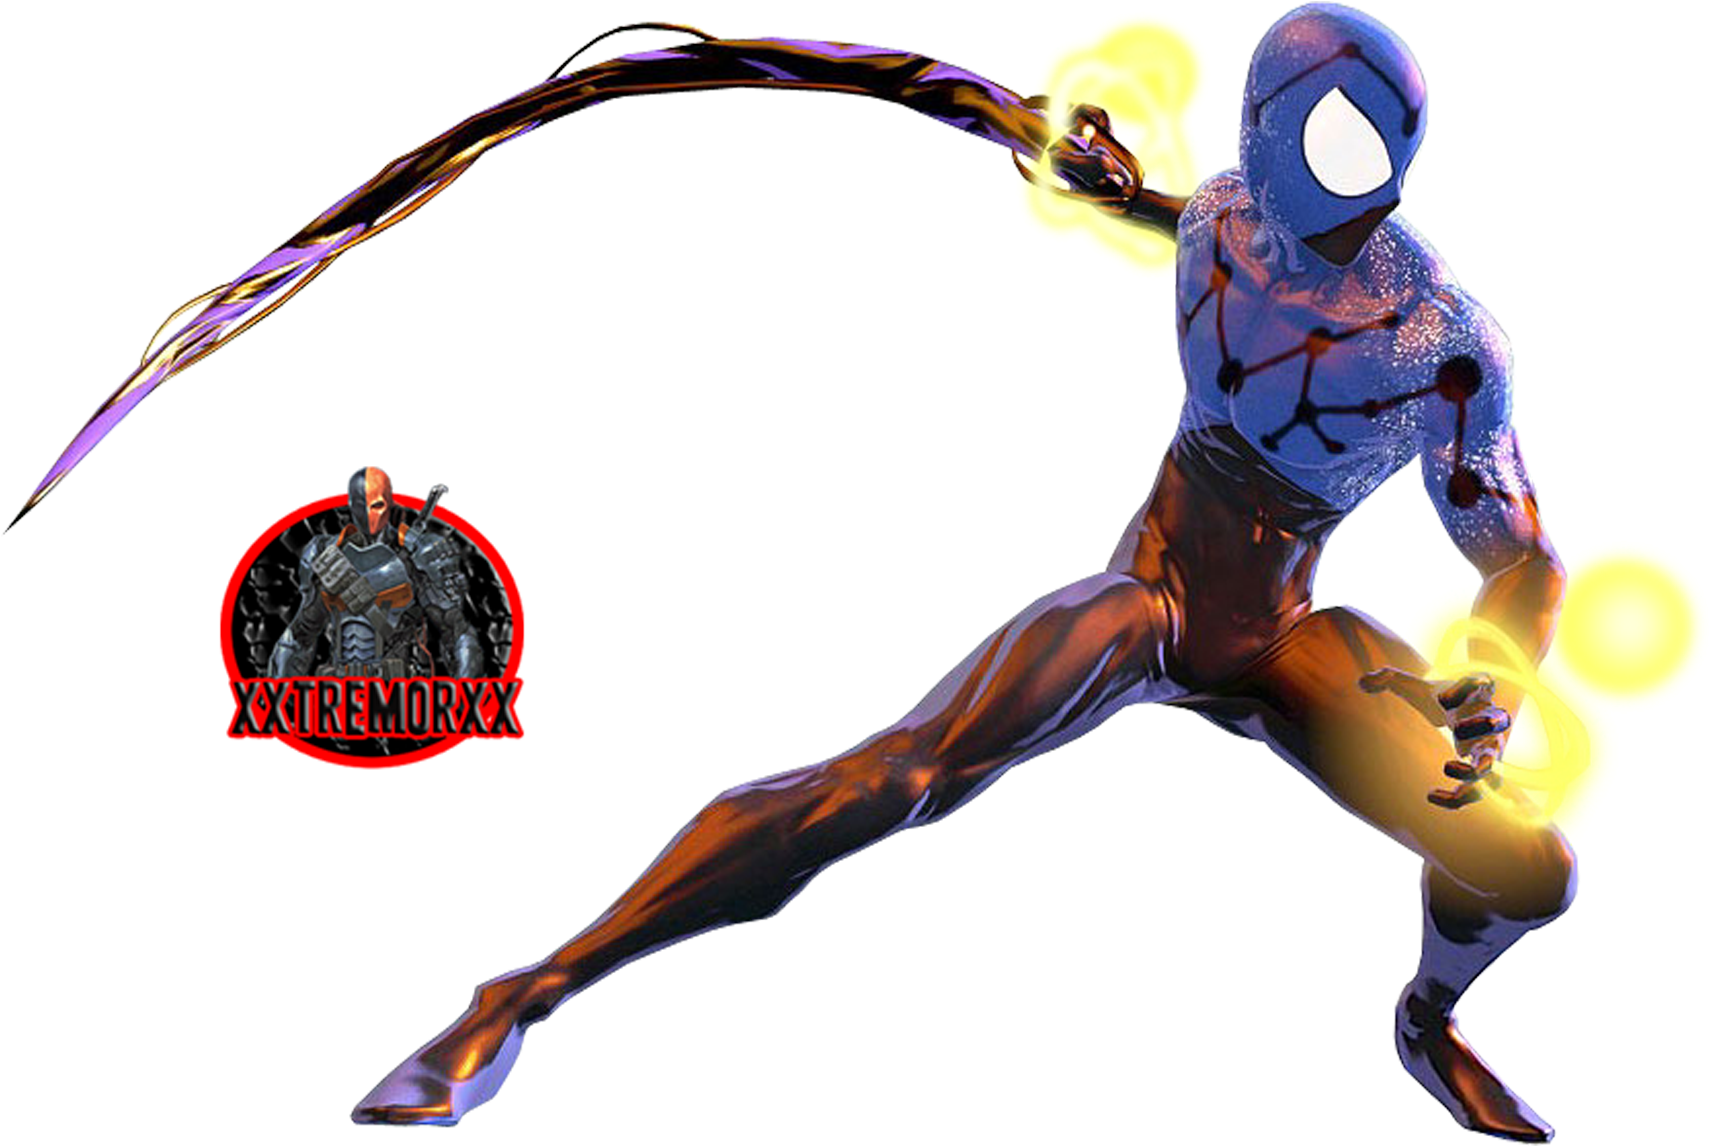 Xxtremorxx 10 0 Cosmic Ultimate Spiderman - Cosmic Spider Man Shattered Dimensions (2000x1200)